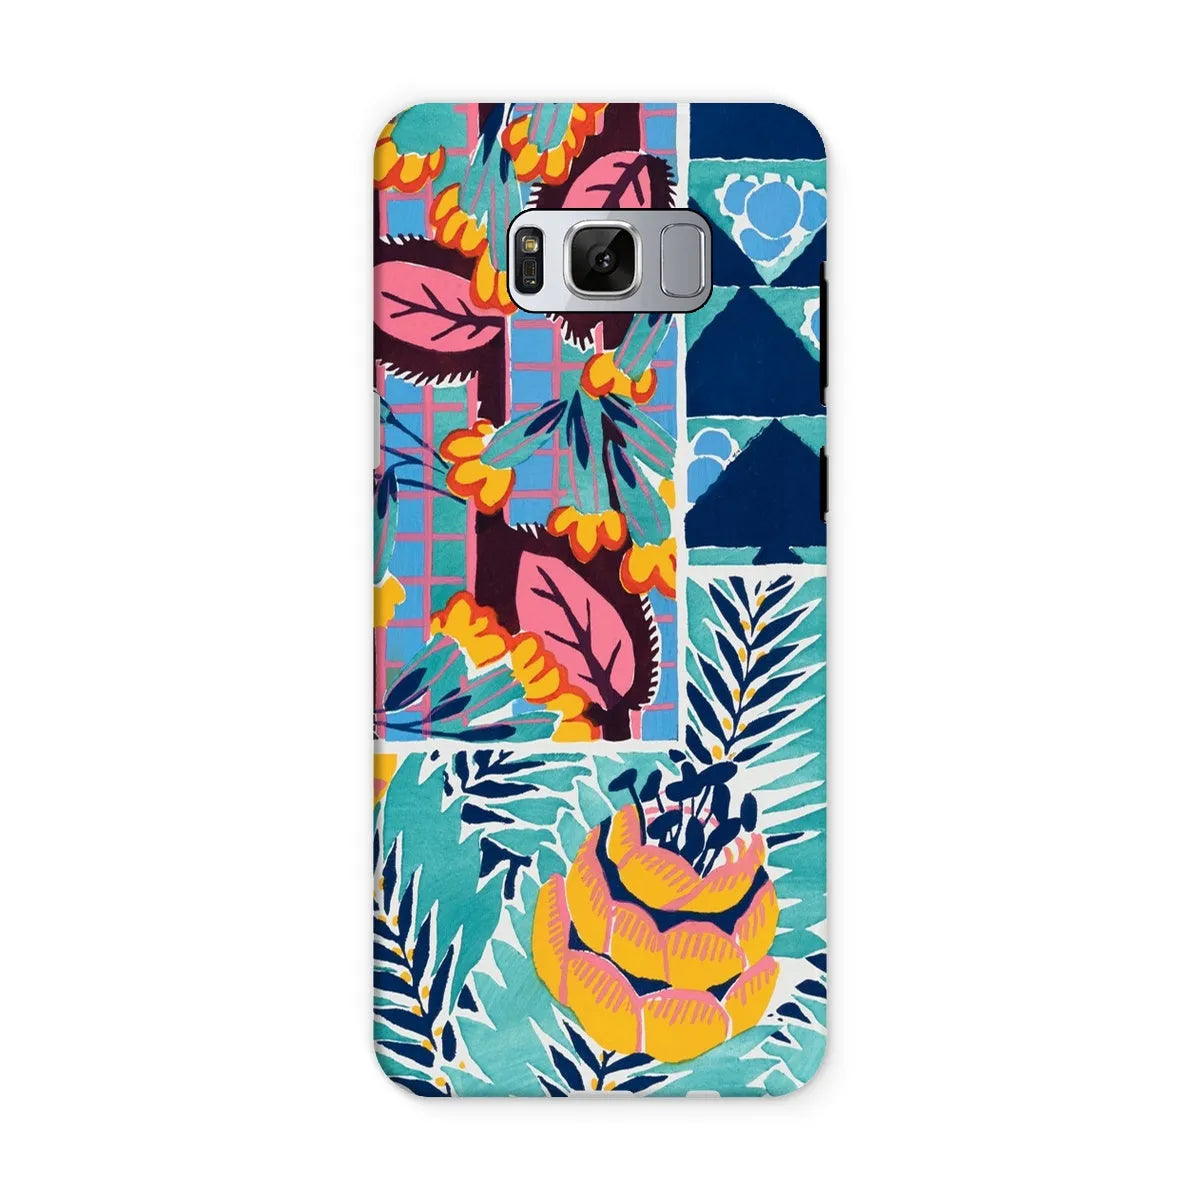 Fabric & Rugs - Pochoir Patterns Phone Case - E. A. Séguy - Samsung Galaxy S8 / Matte - Mobile Phone Cases